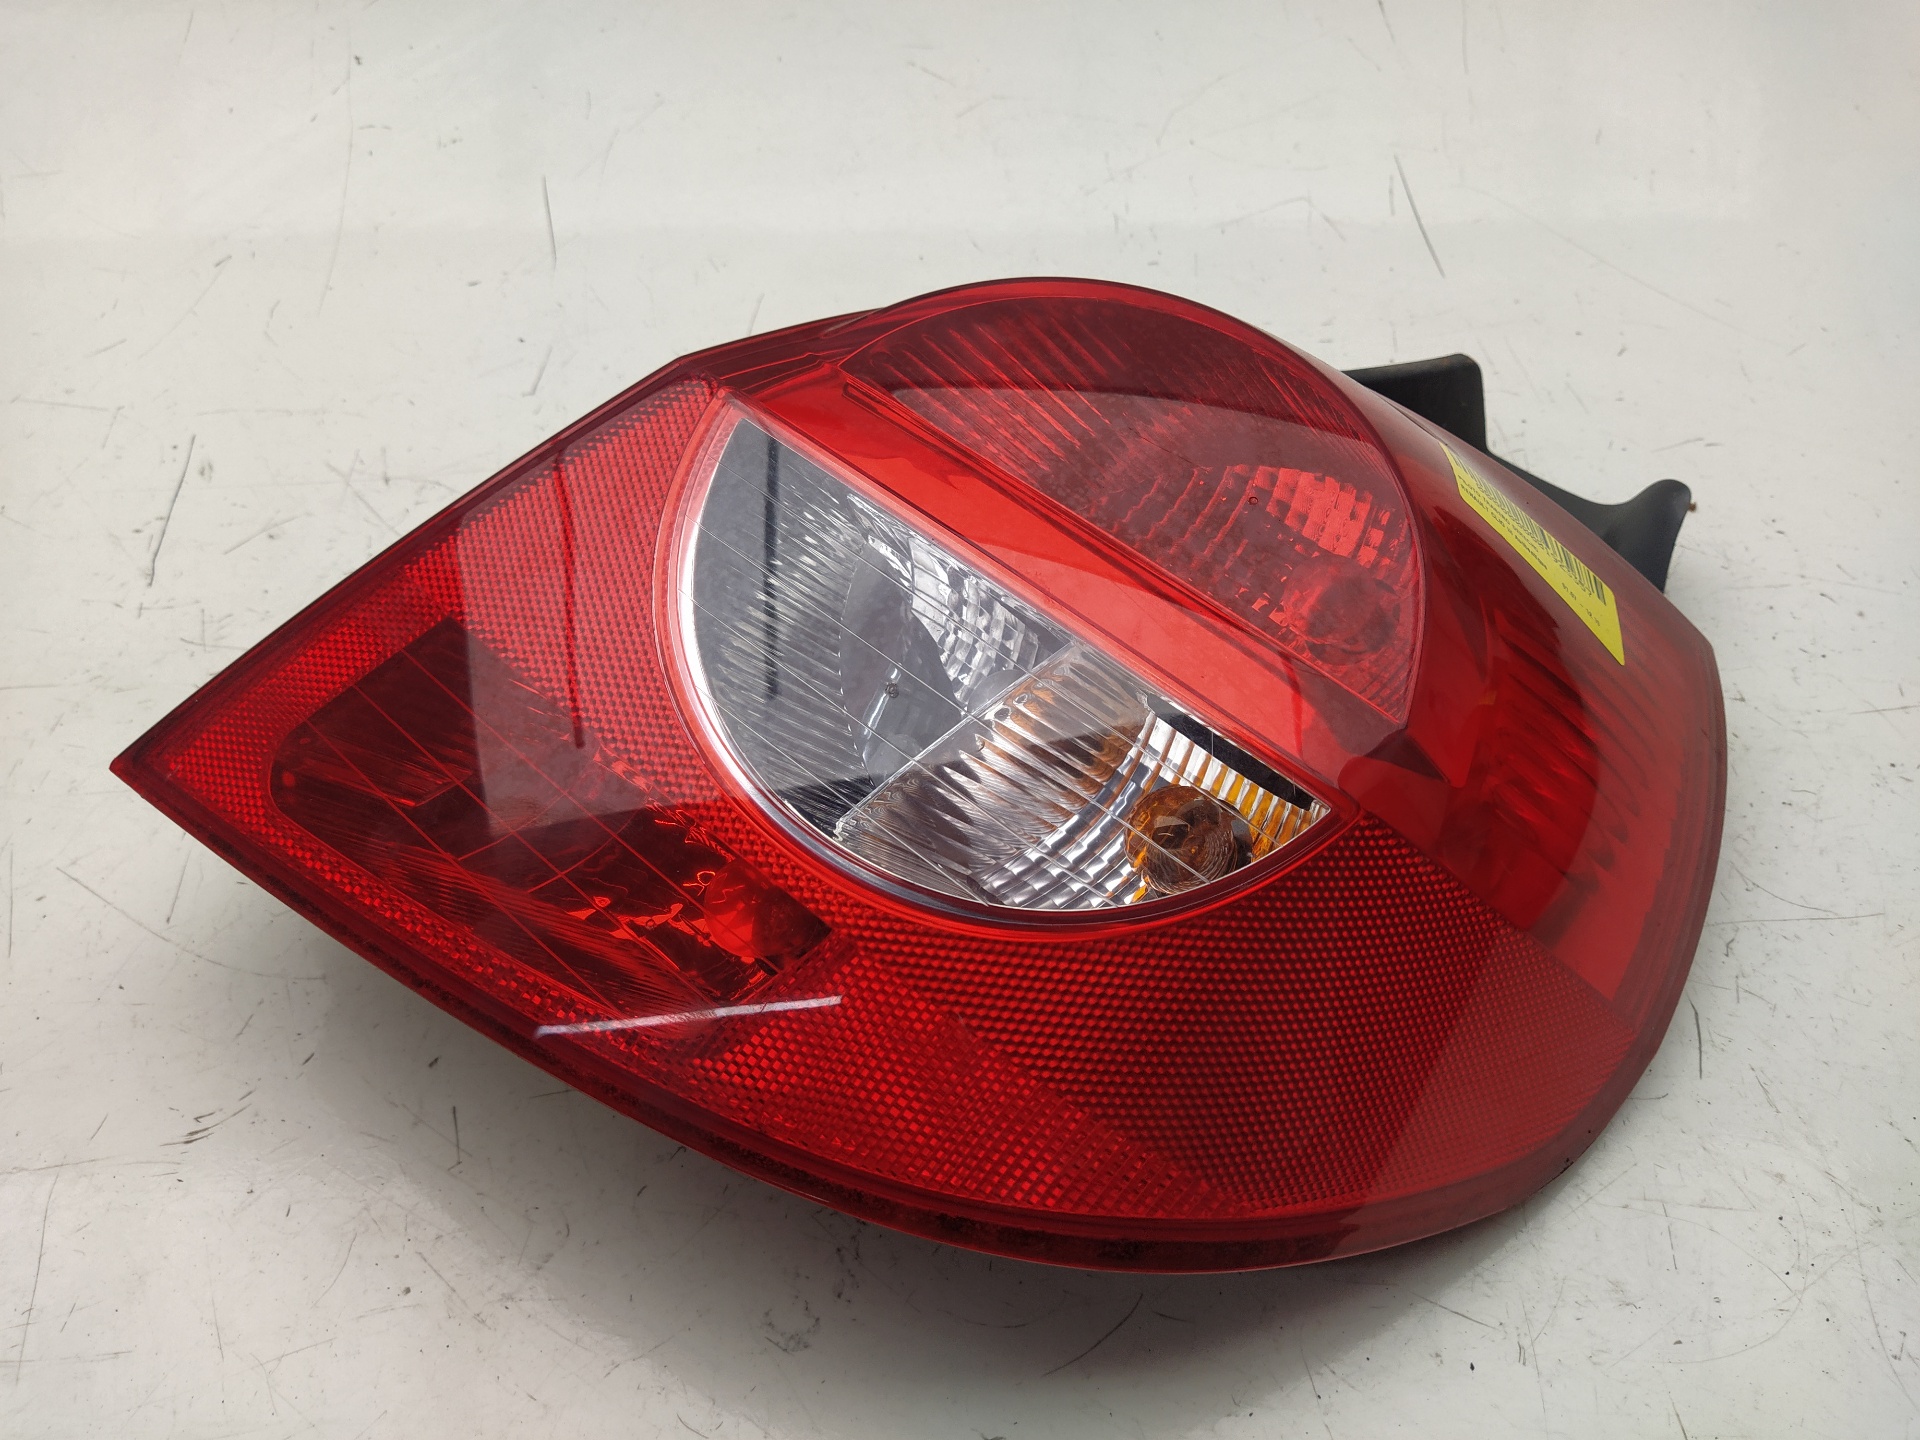 RENAULT Clio 2 generation (1998-2013) Rear Right Taillight Lamp 89035080 21063905